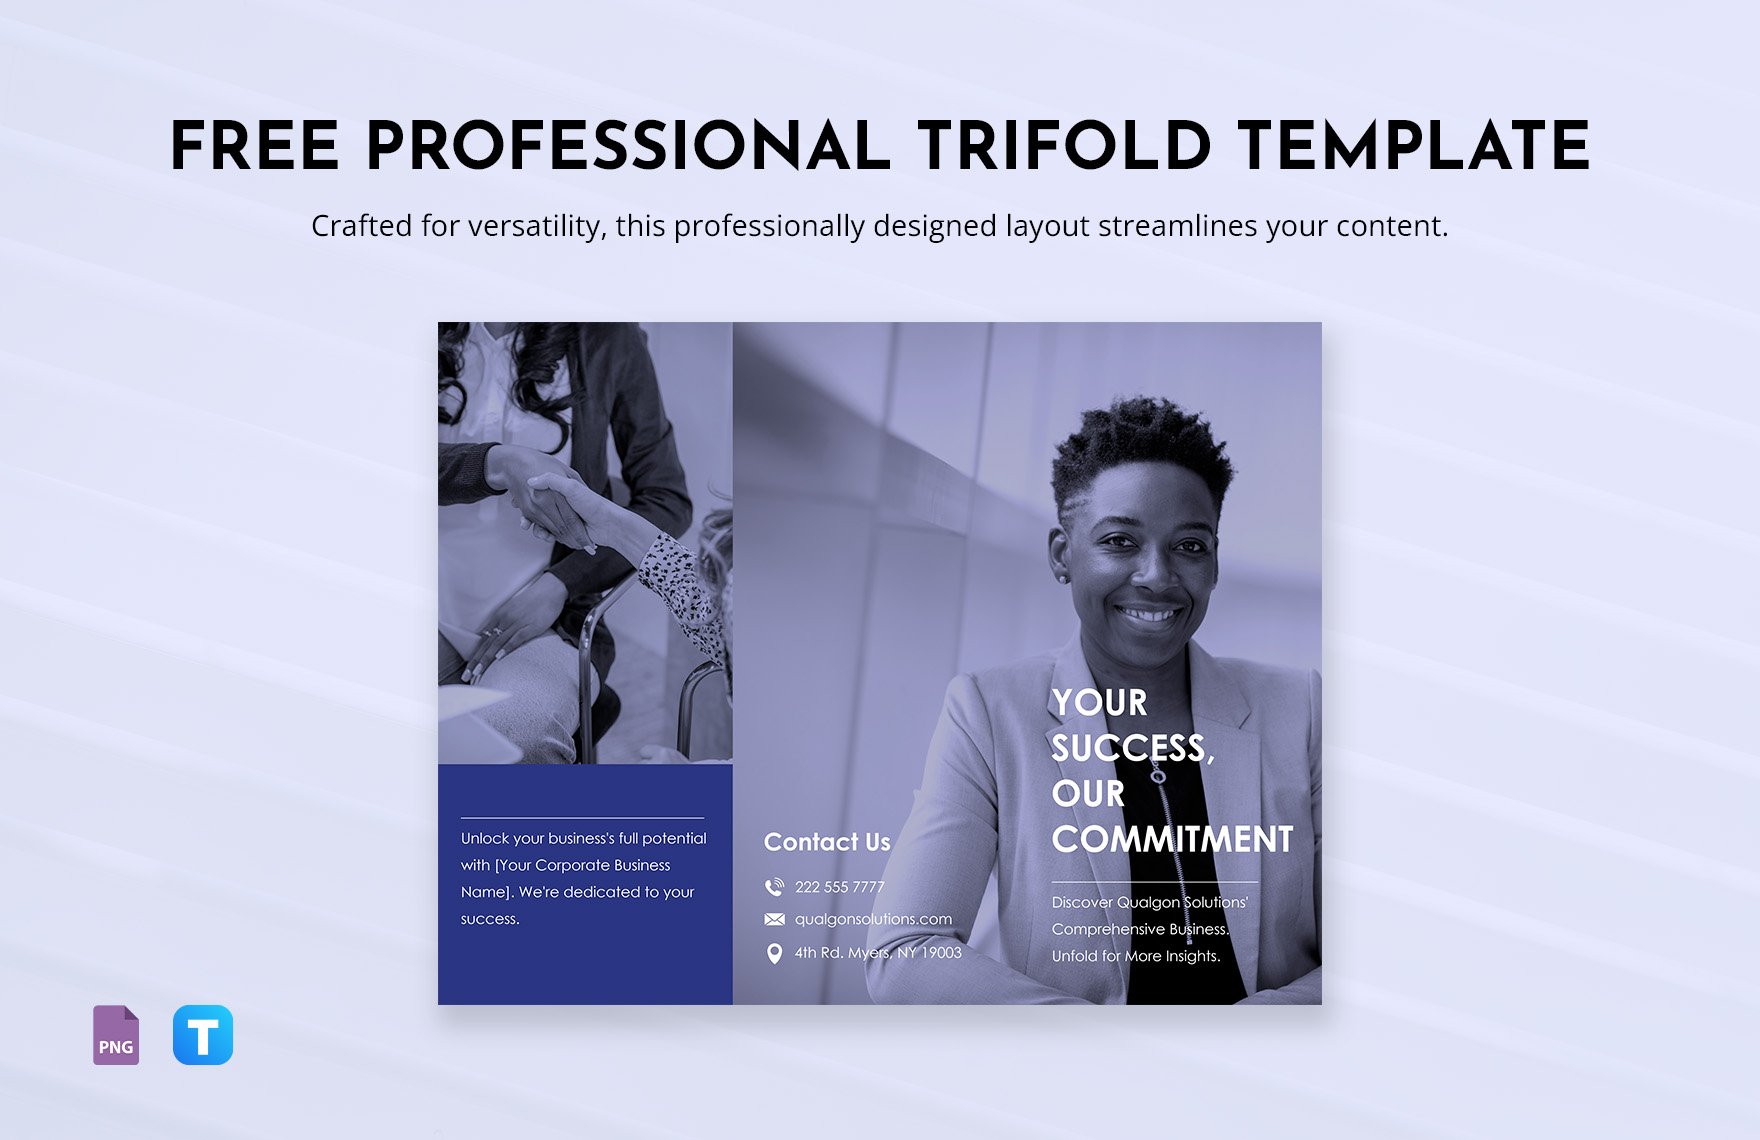 Free Professional Trifold Template